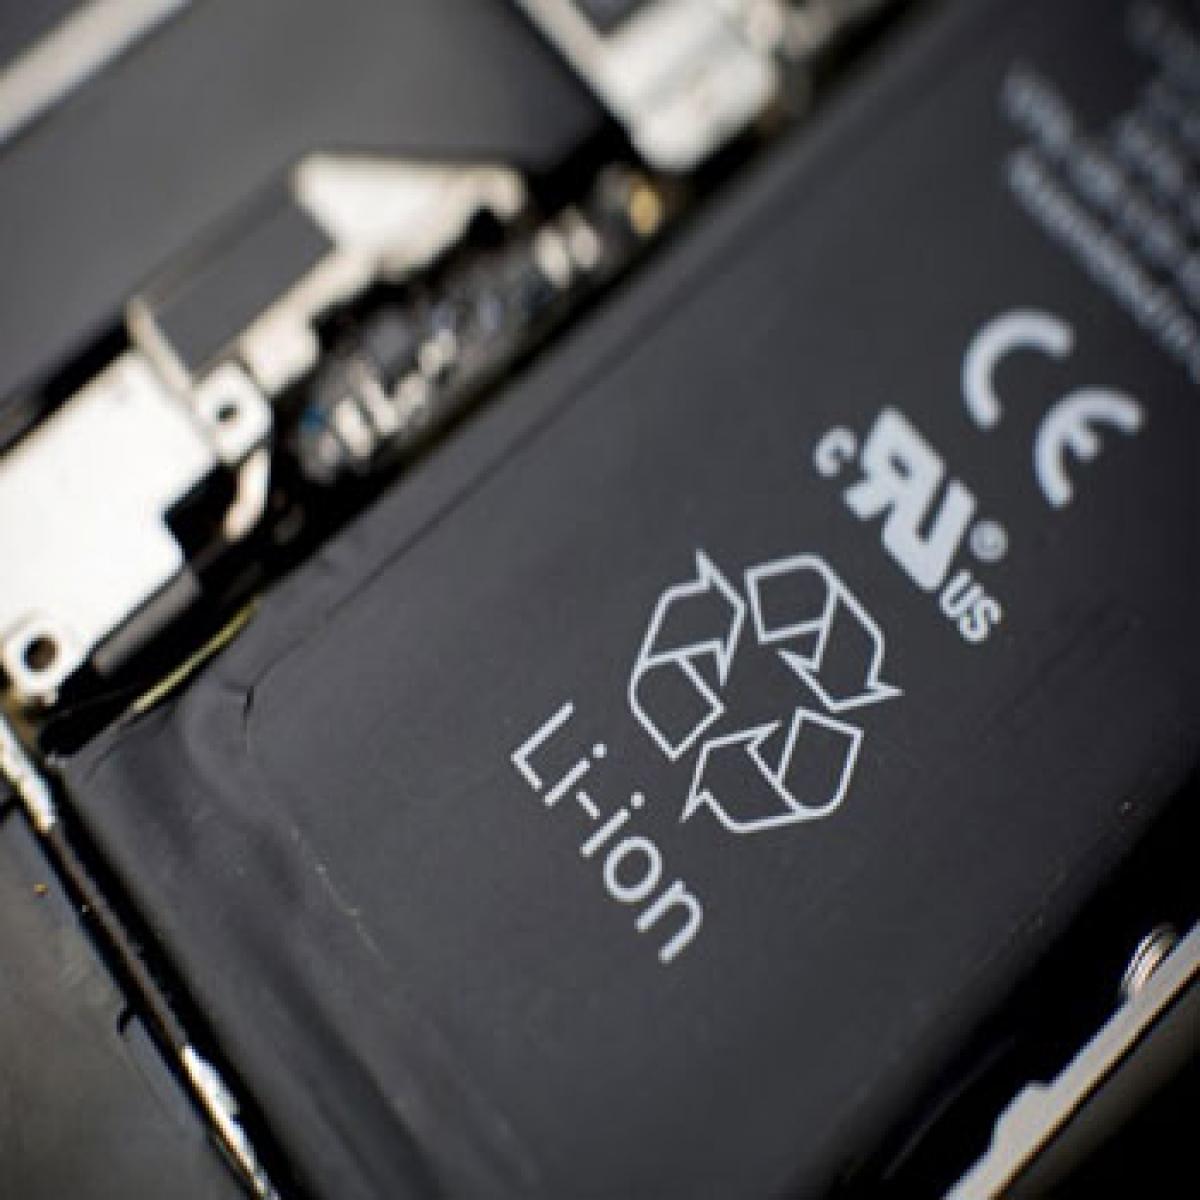 Gen next battery may store five times more energy